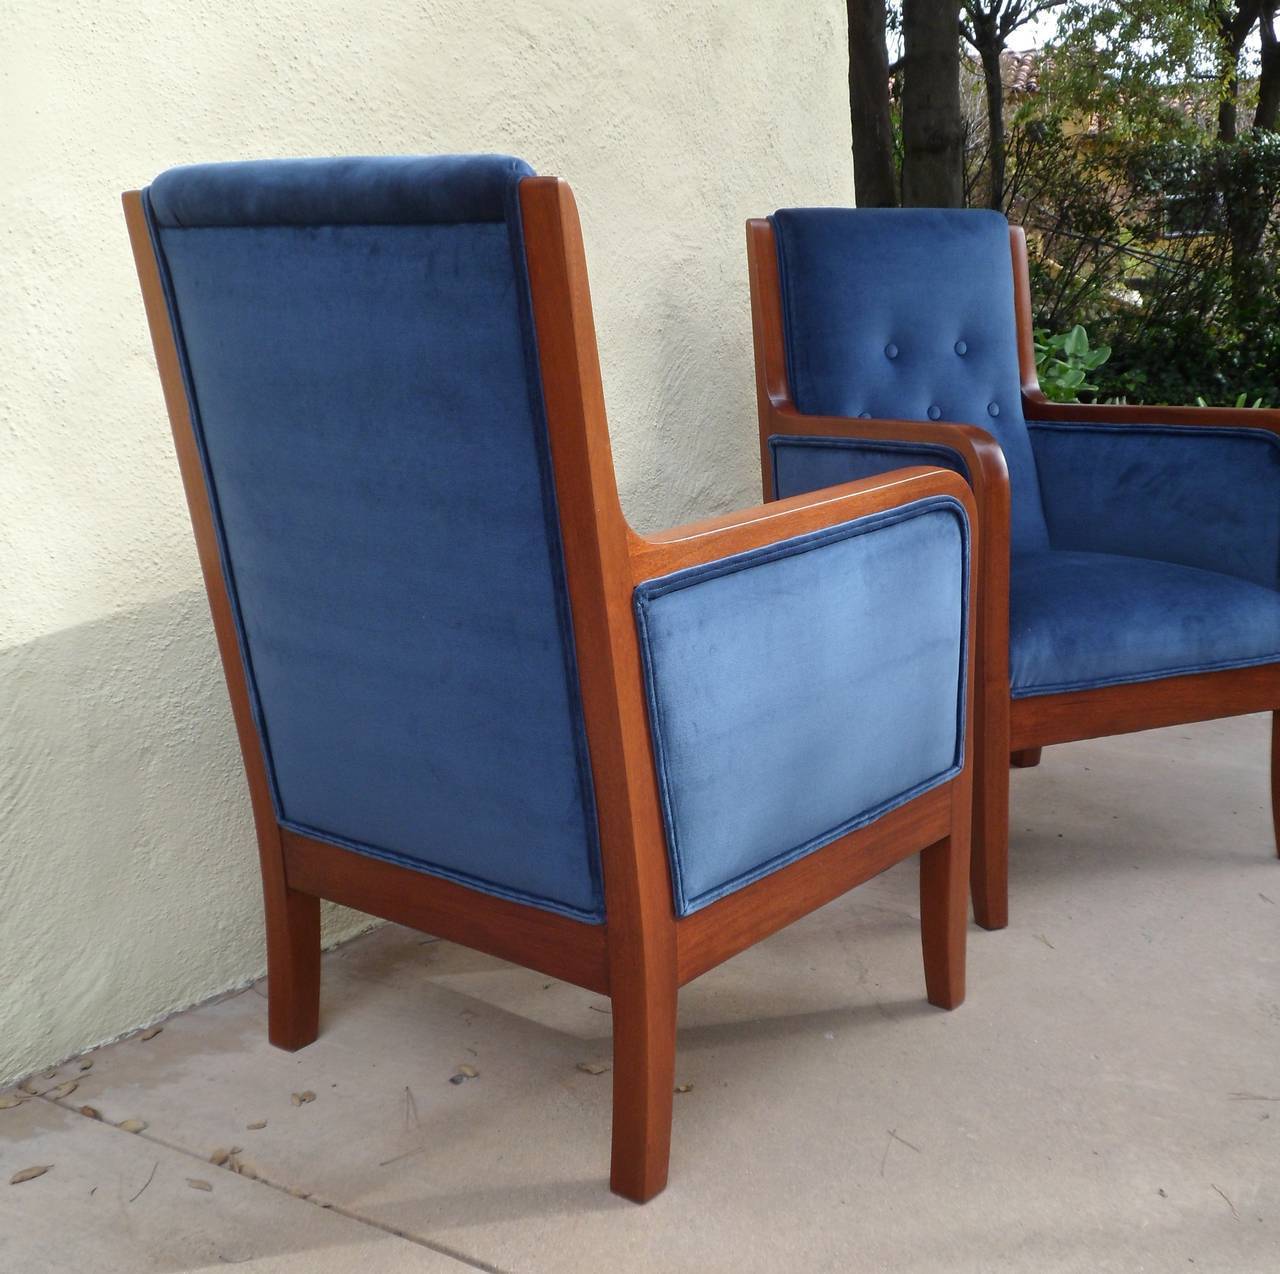 Early 20th Century Pair of Small Scale Swedish Art Deco Armchairs, circa 1920